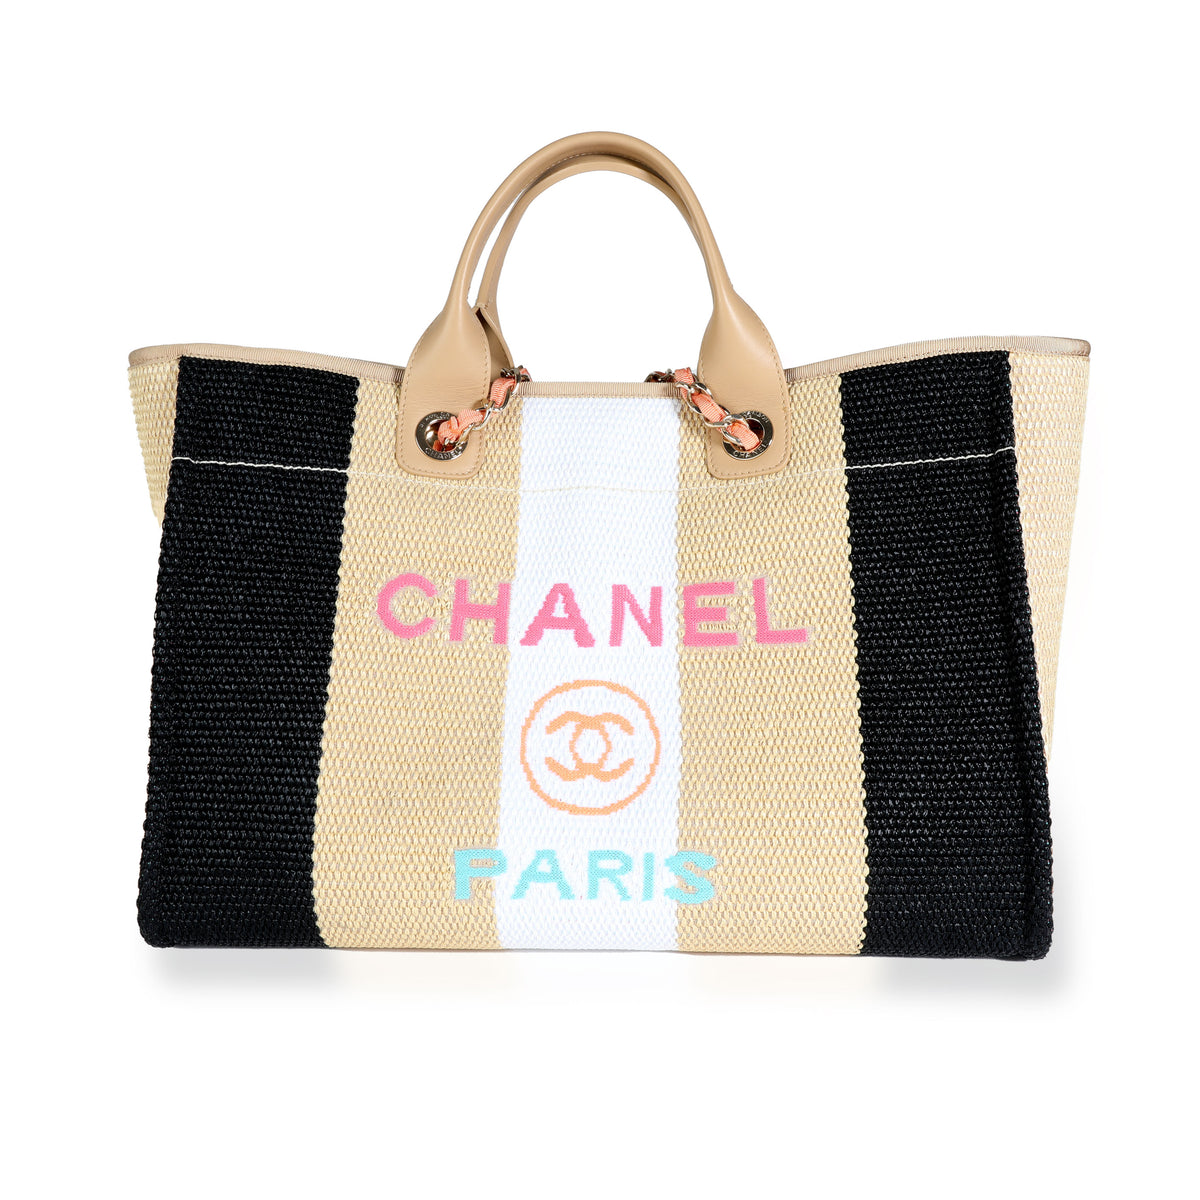 Chanel Deauville Shopping Bag - Cruise 2020